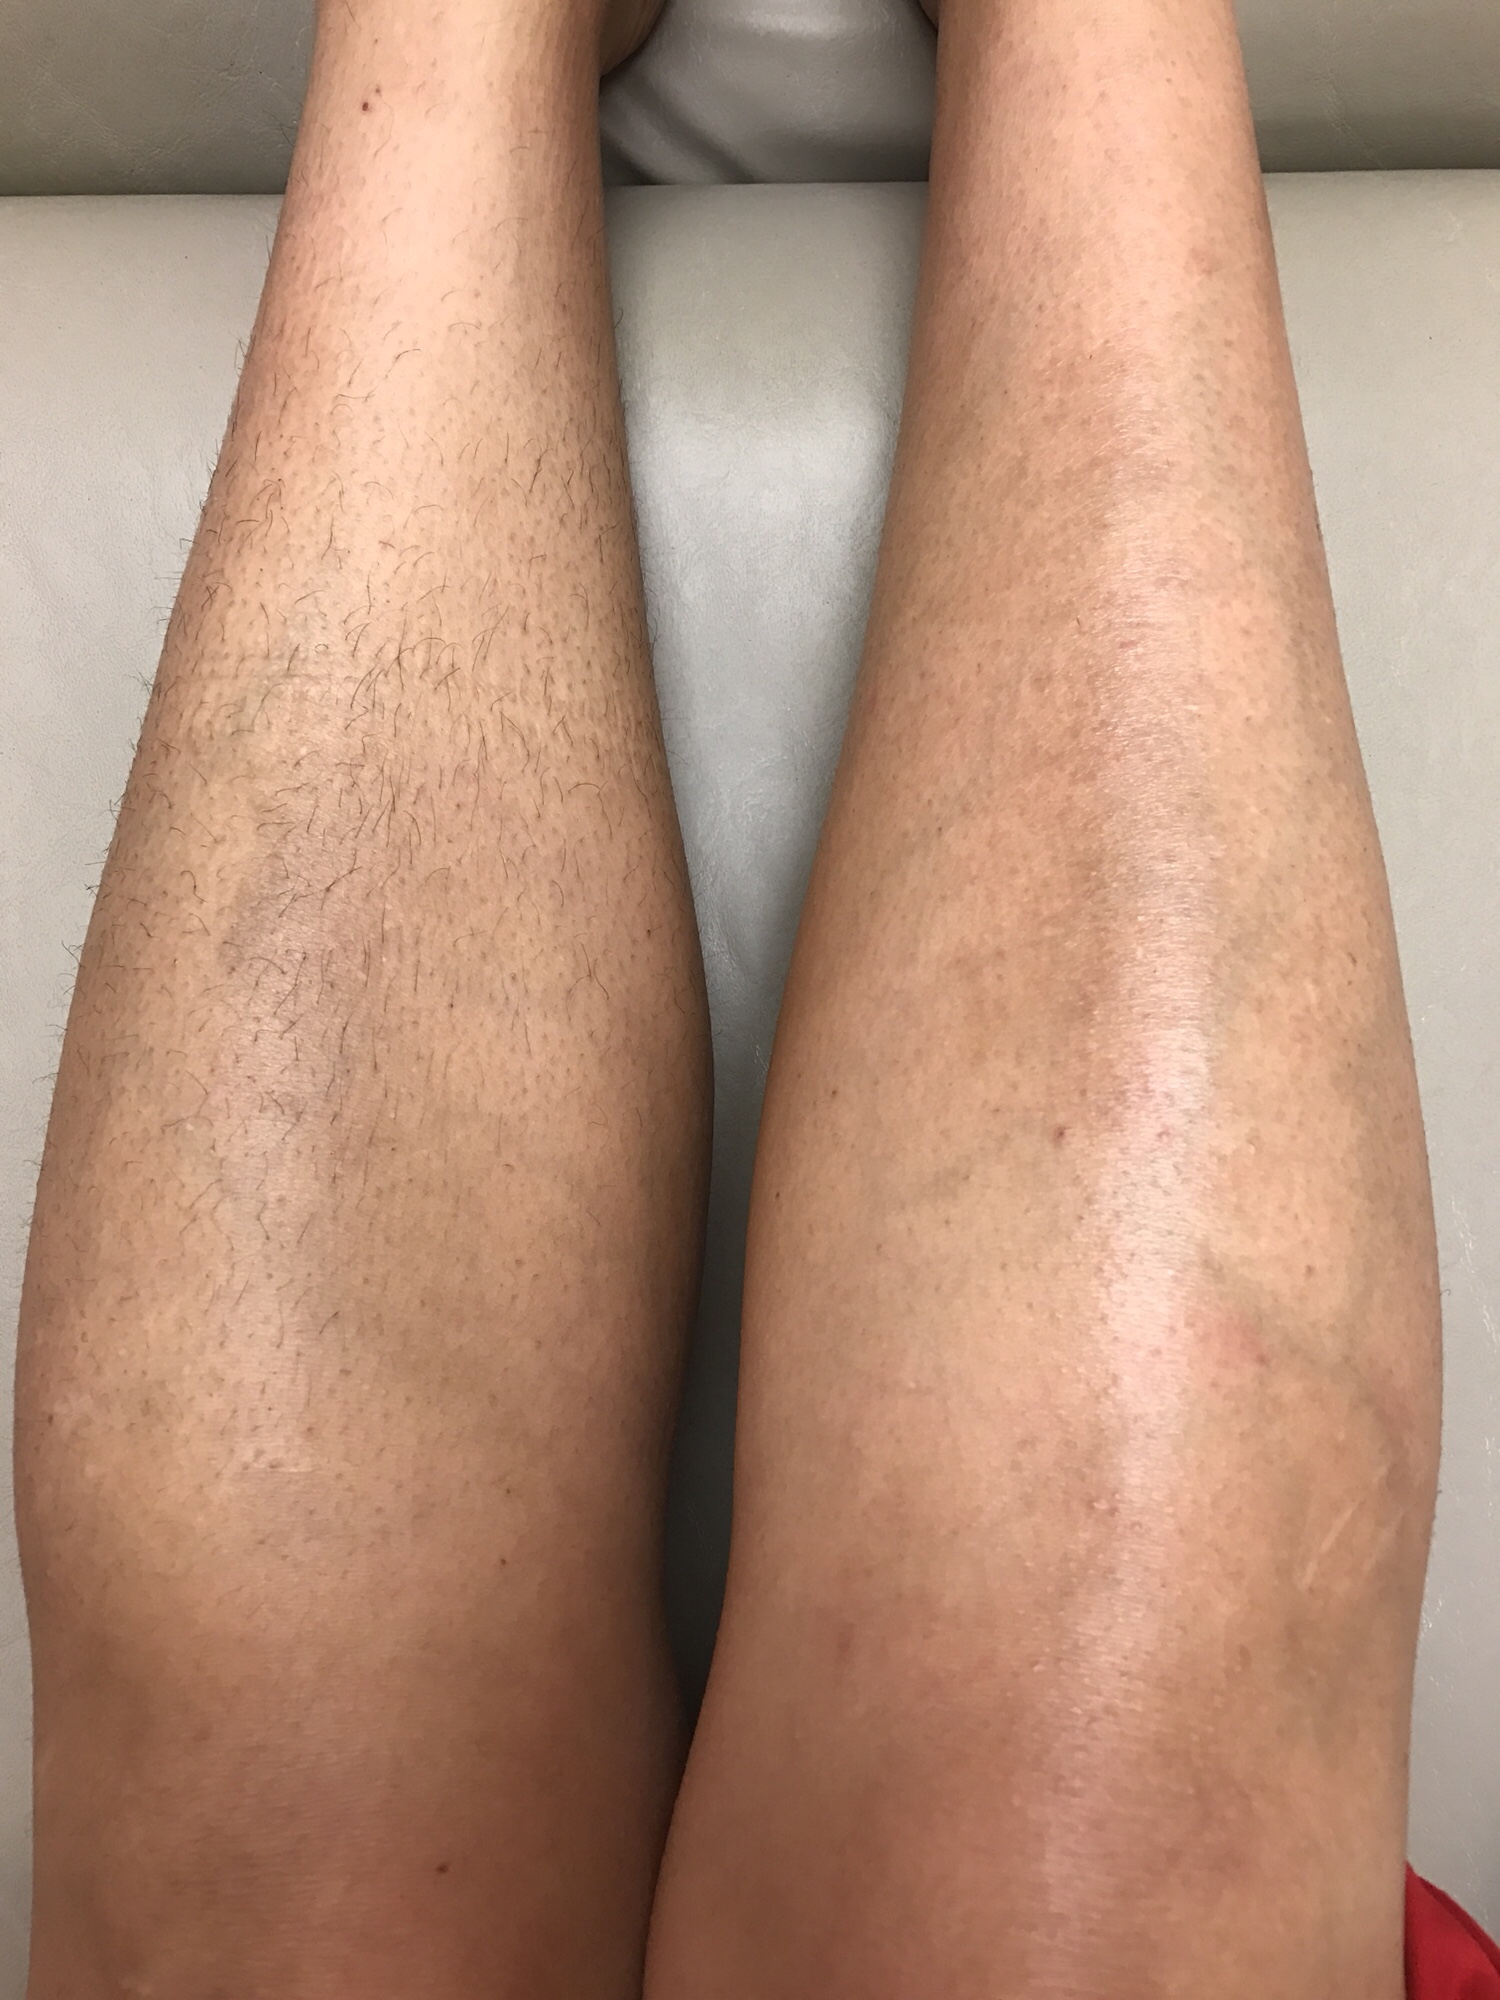 an image of legs during a wax treatment